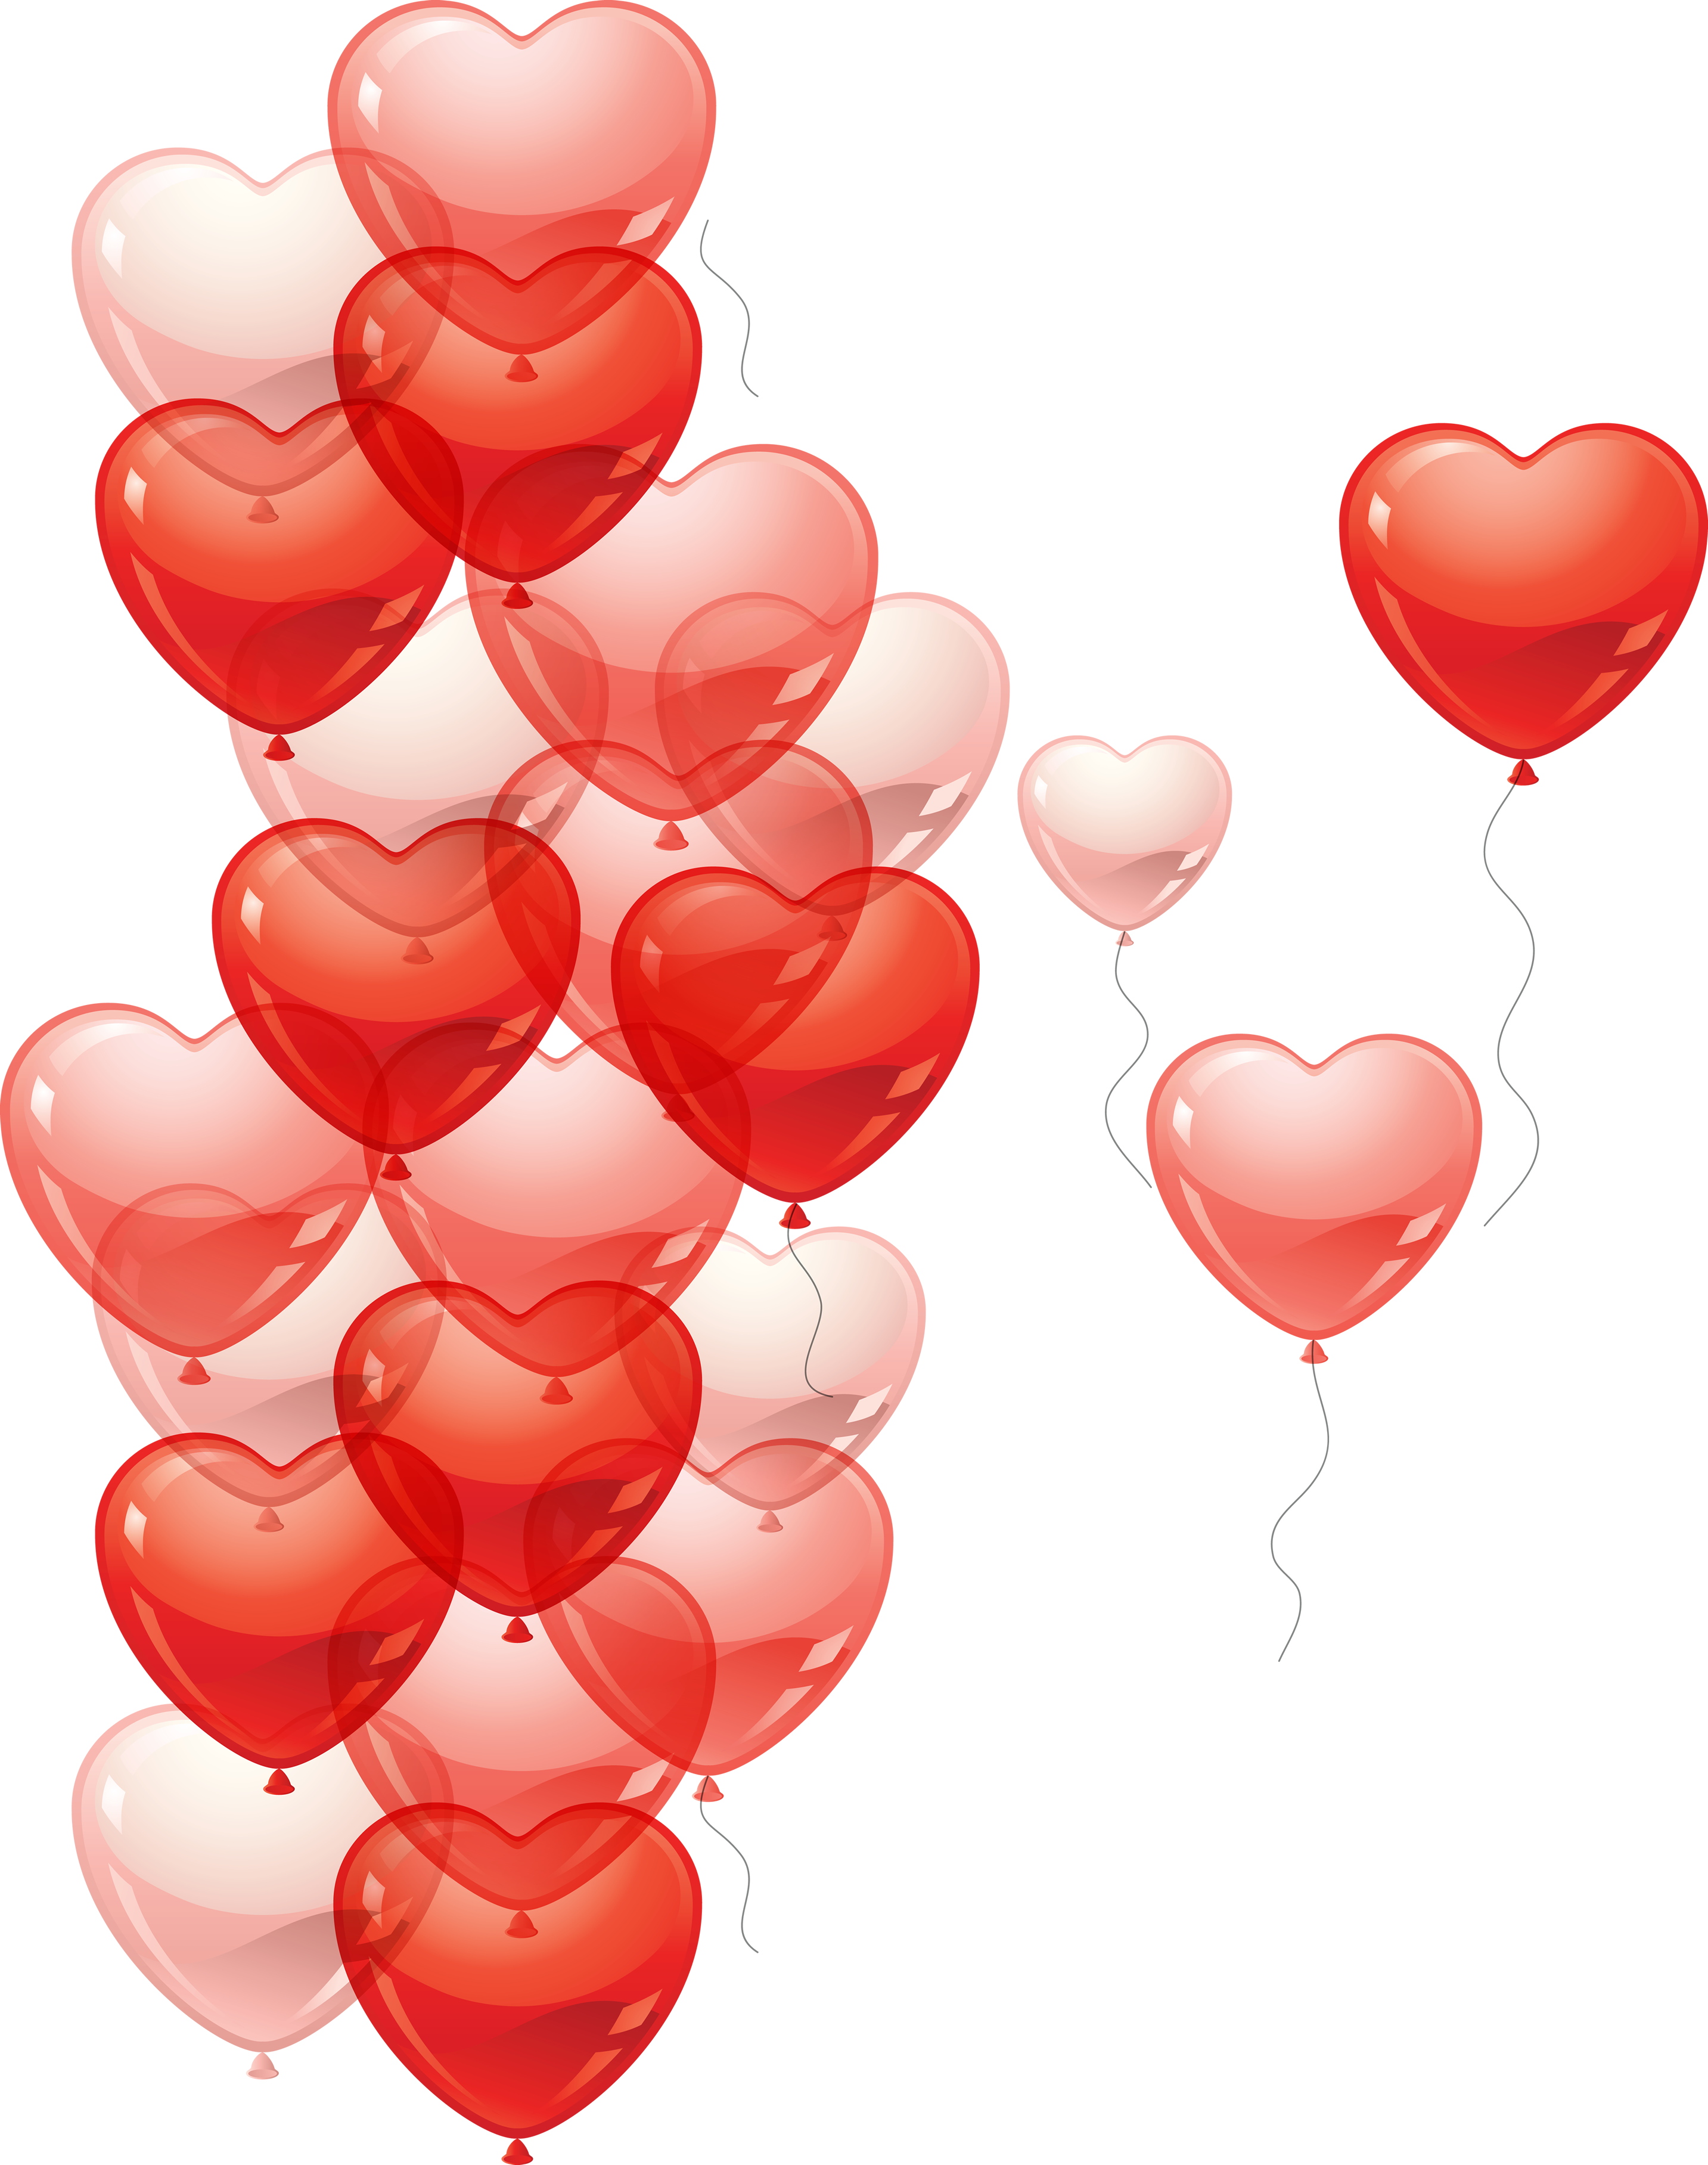 Many Flying Heart Balloons PNG Image